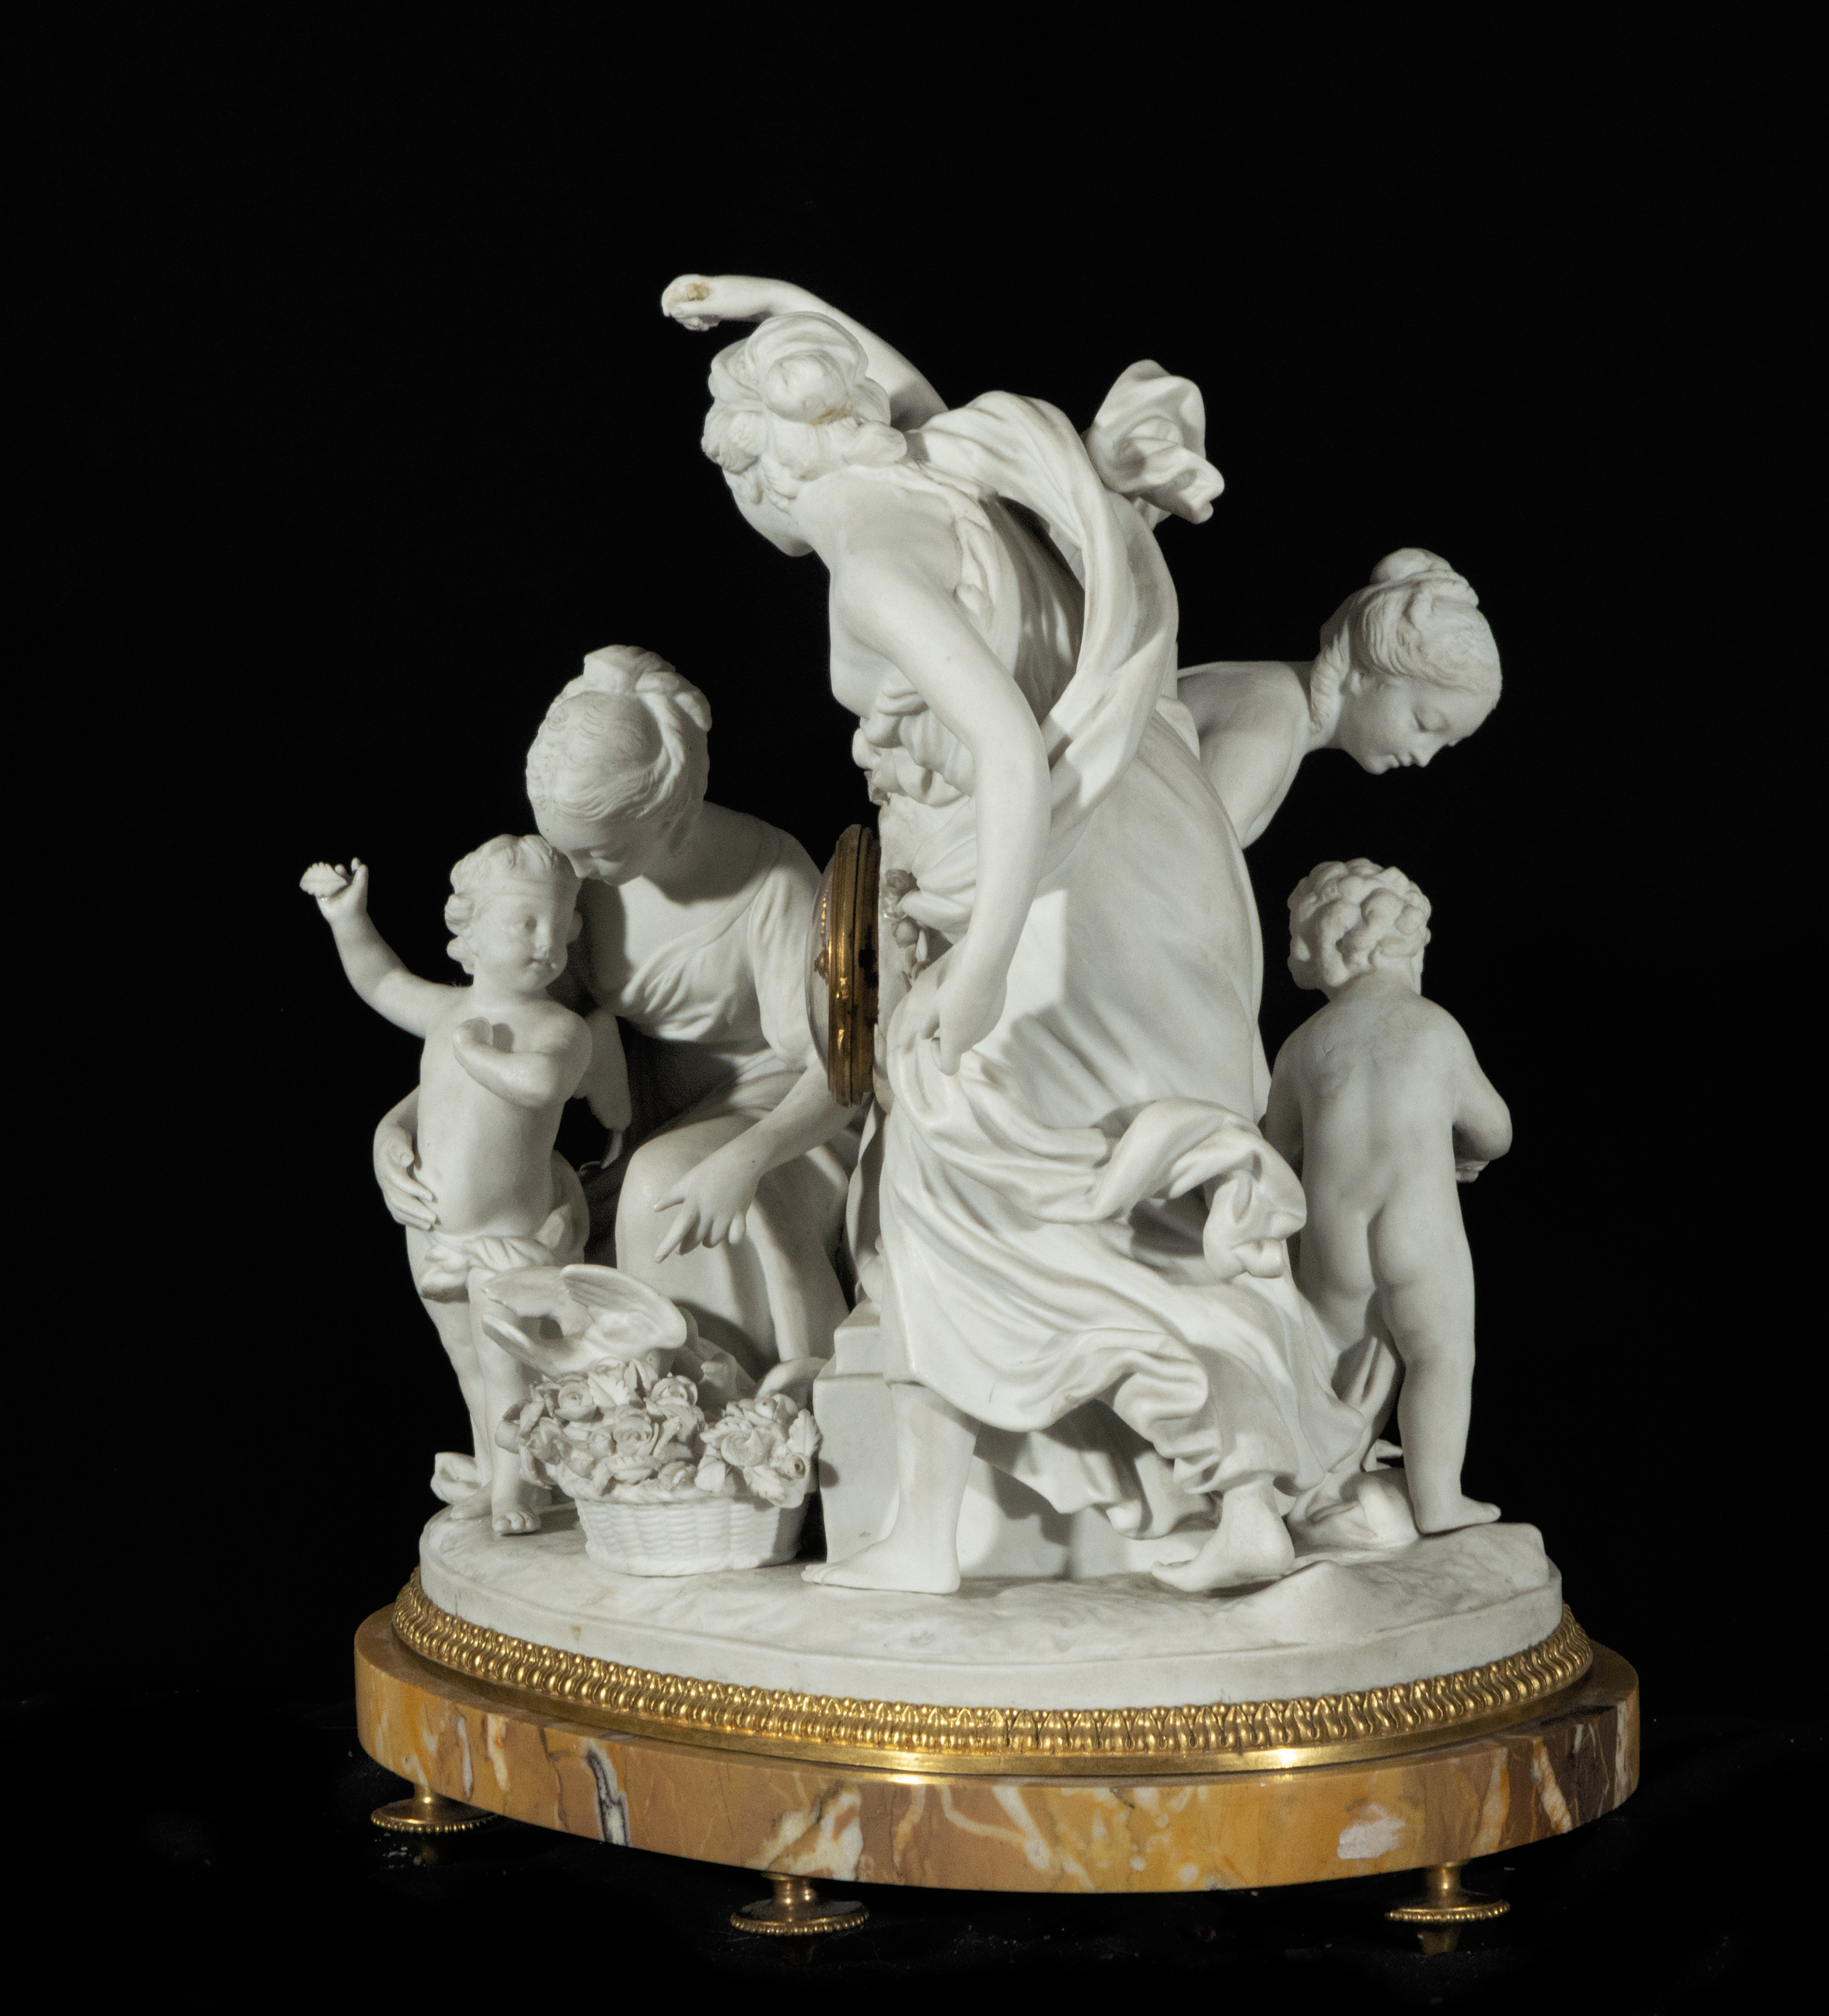 Elegant Louis XVI table clock in Siena marble, gilt bronze, and biscuit porcelain from Sèvres, late  - Image 2 of 4